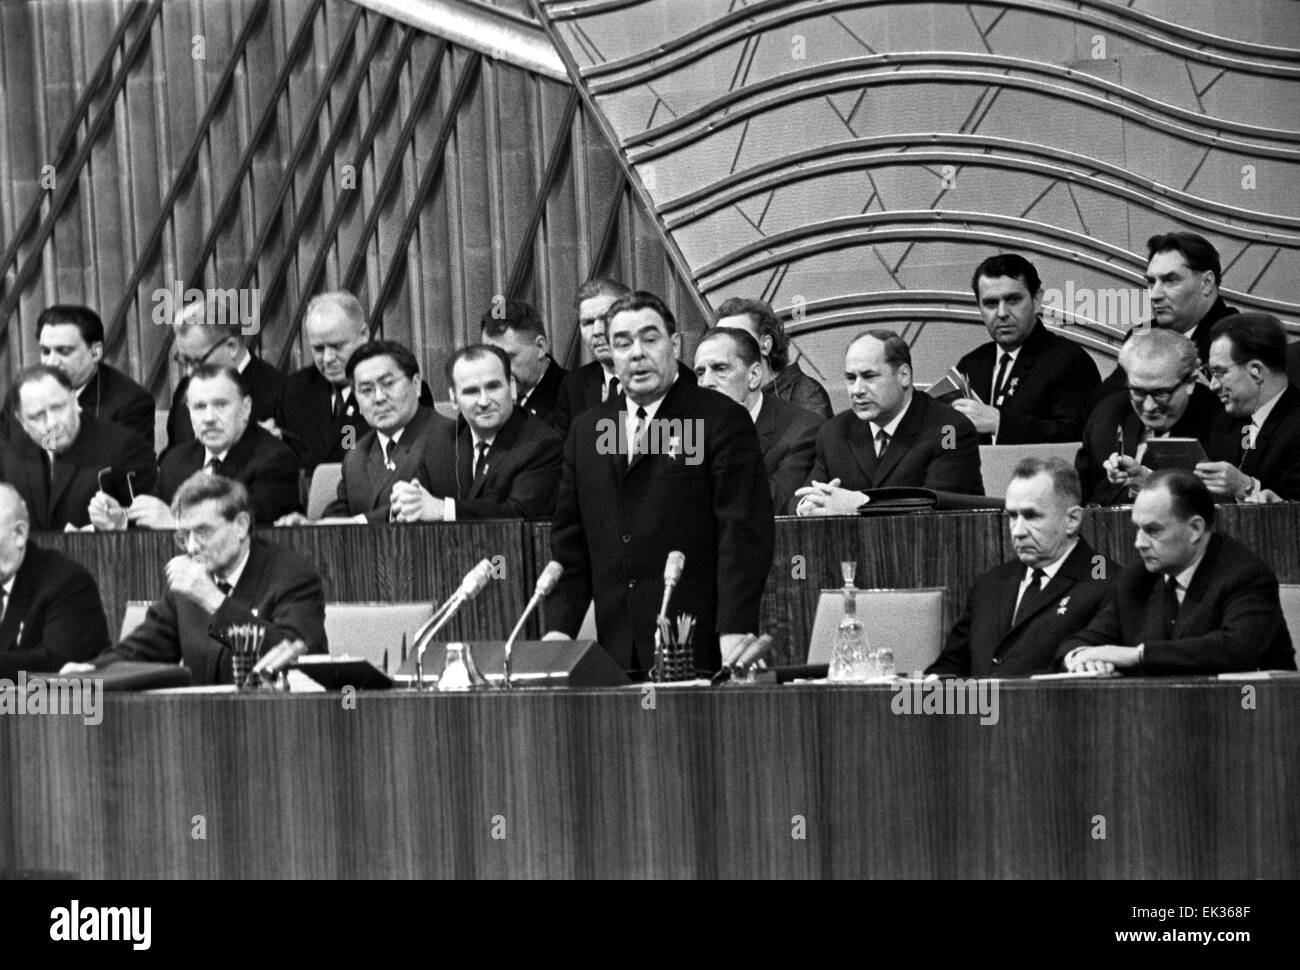 Itar Tass Ussr Moscow The General Secretary Of The Central Committee Of Communist Party Of The Soviet Union Leonid Brezhnevin The Middle Is Giving A Speech At The 23rd Congress Of The Cpsu